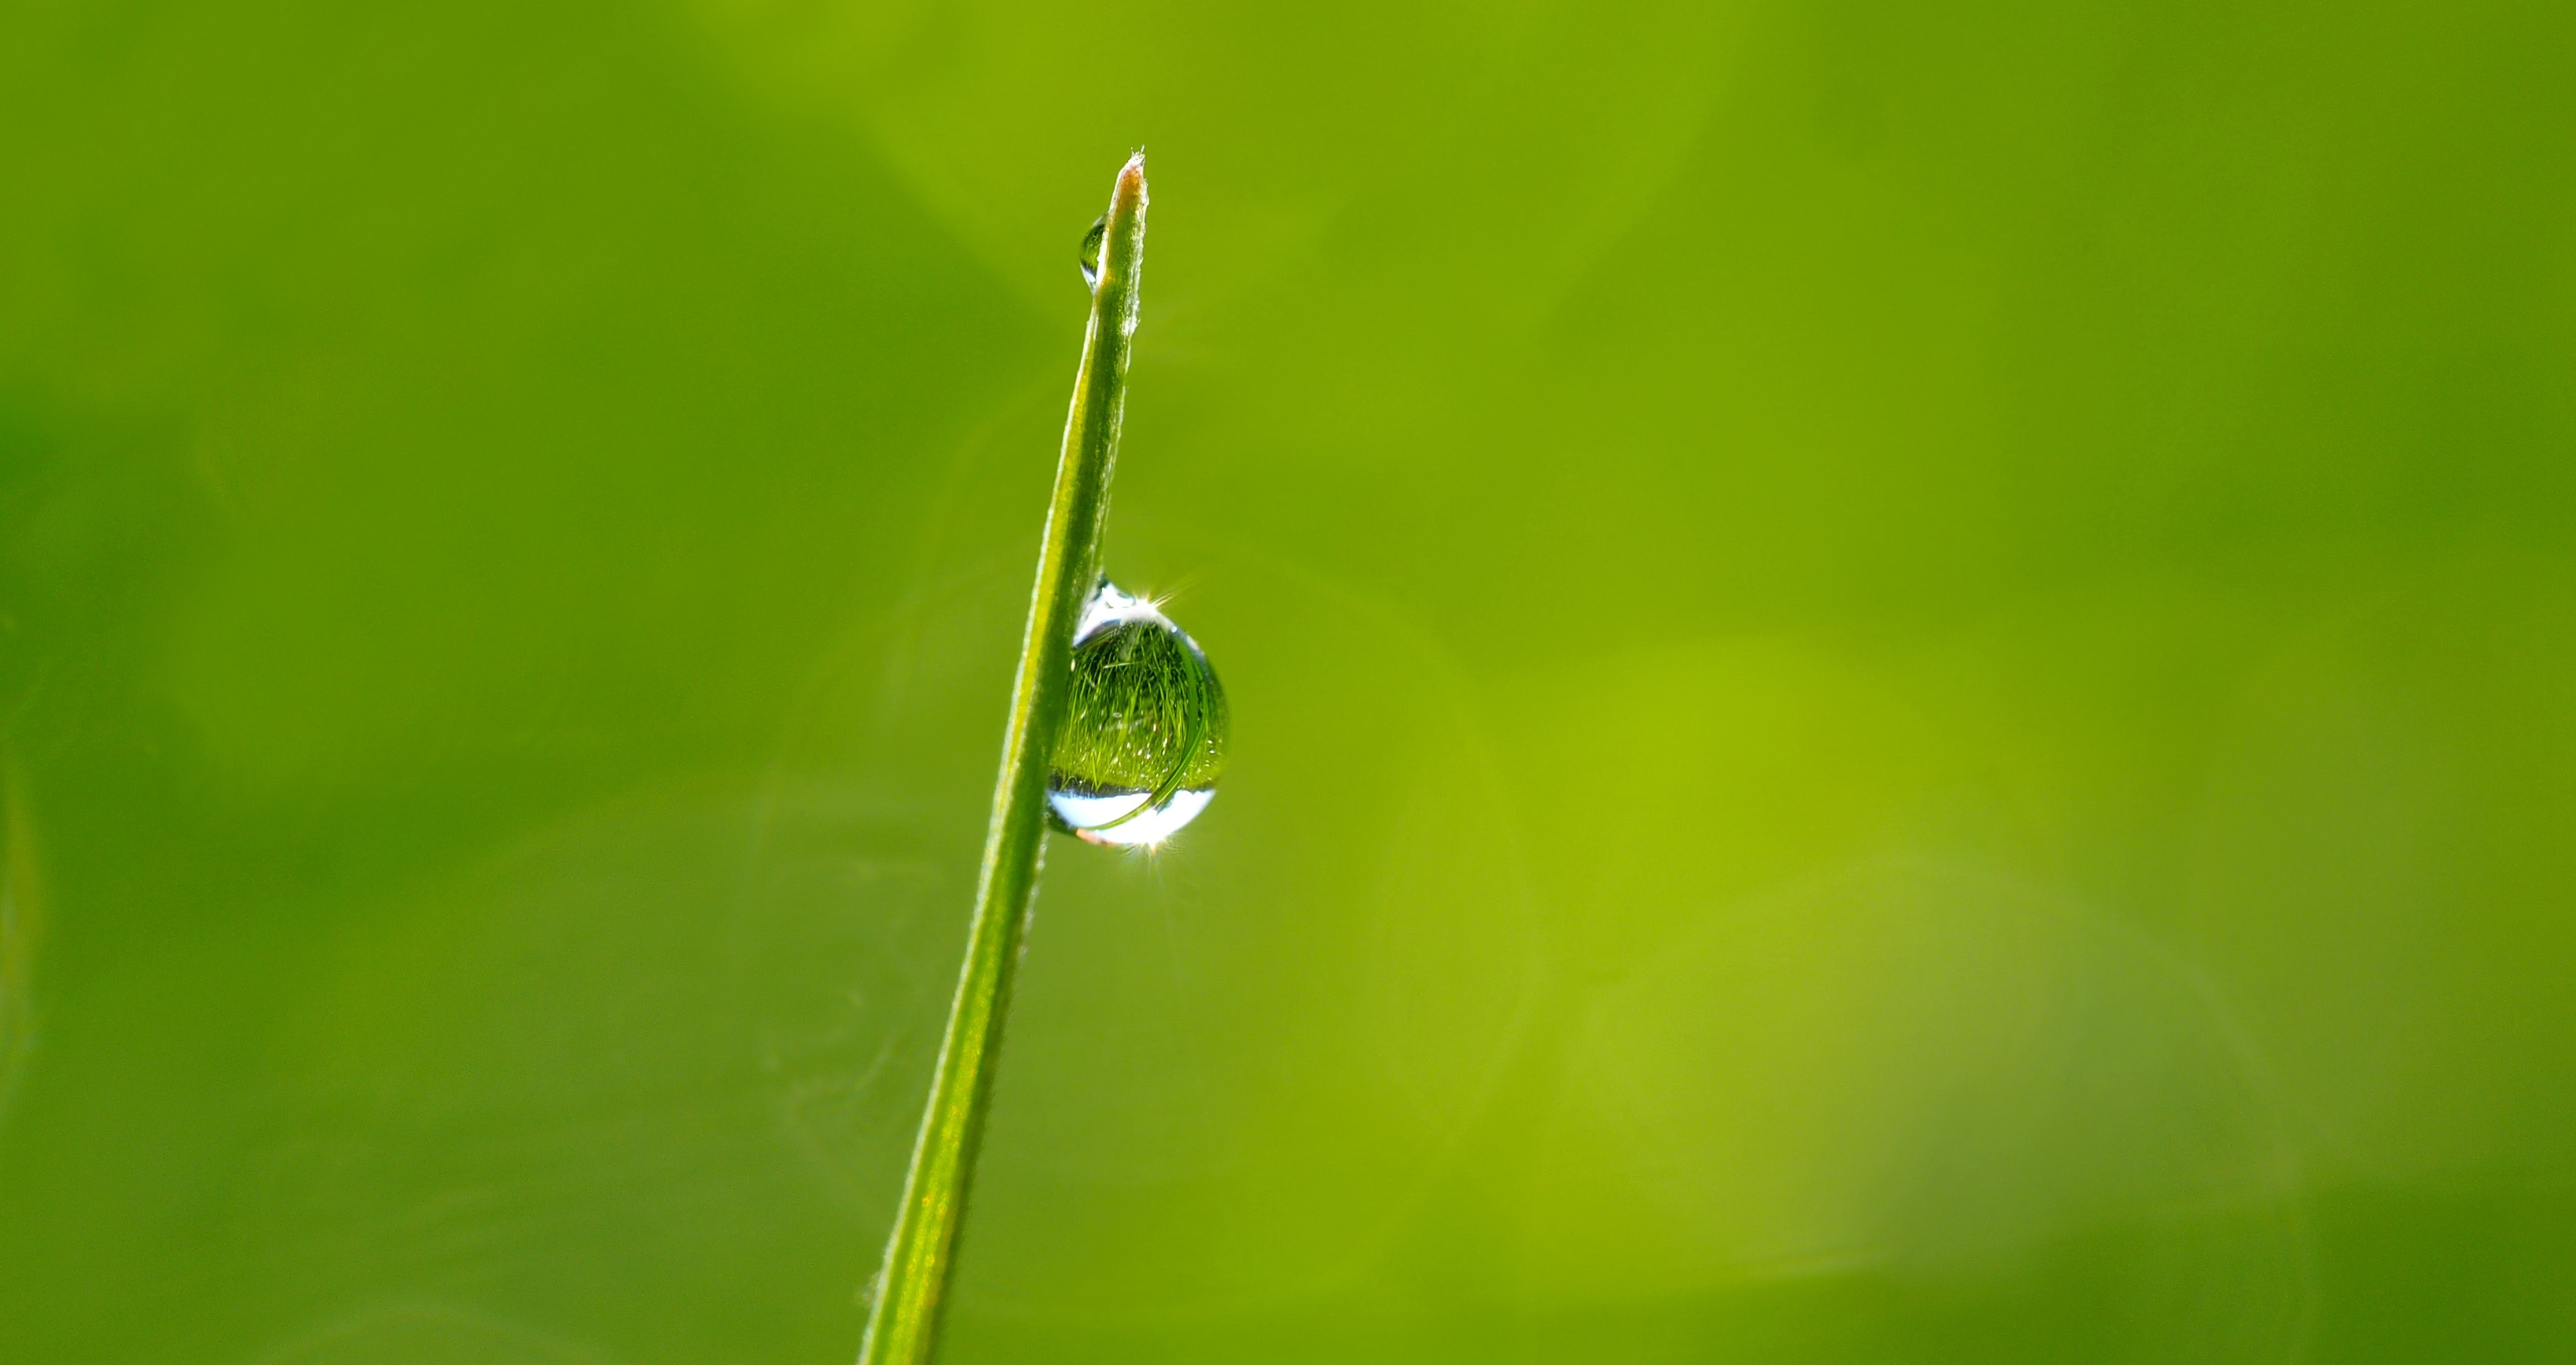 Macro photography of droplet on green leaf during daytime